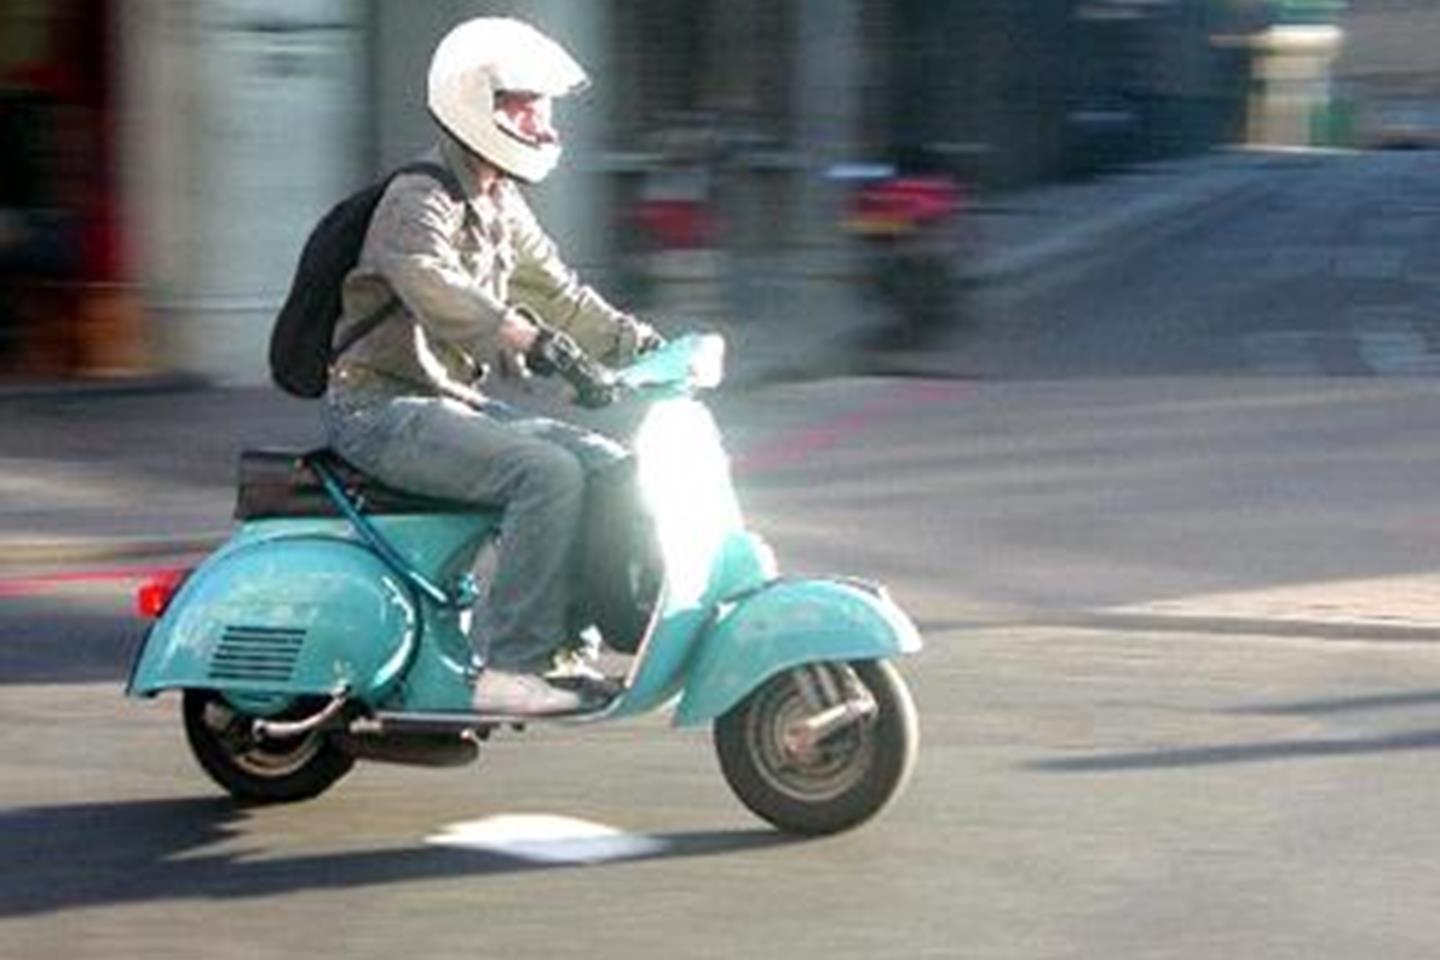 Police check mopeds power output at the roadside | MCN